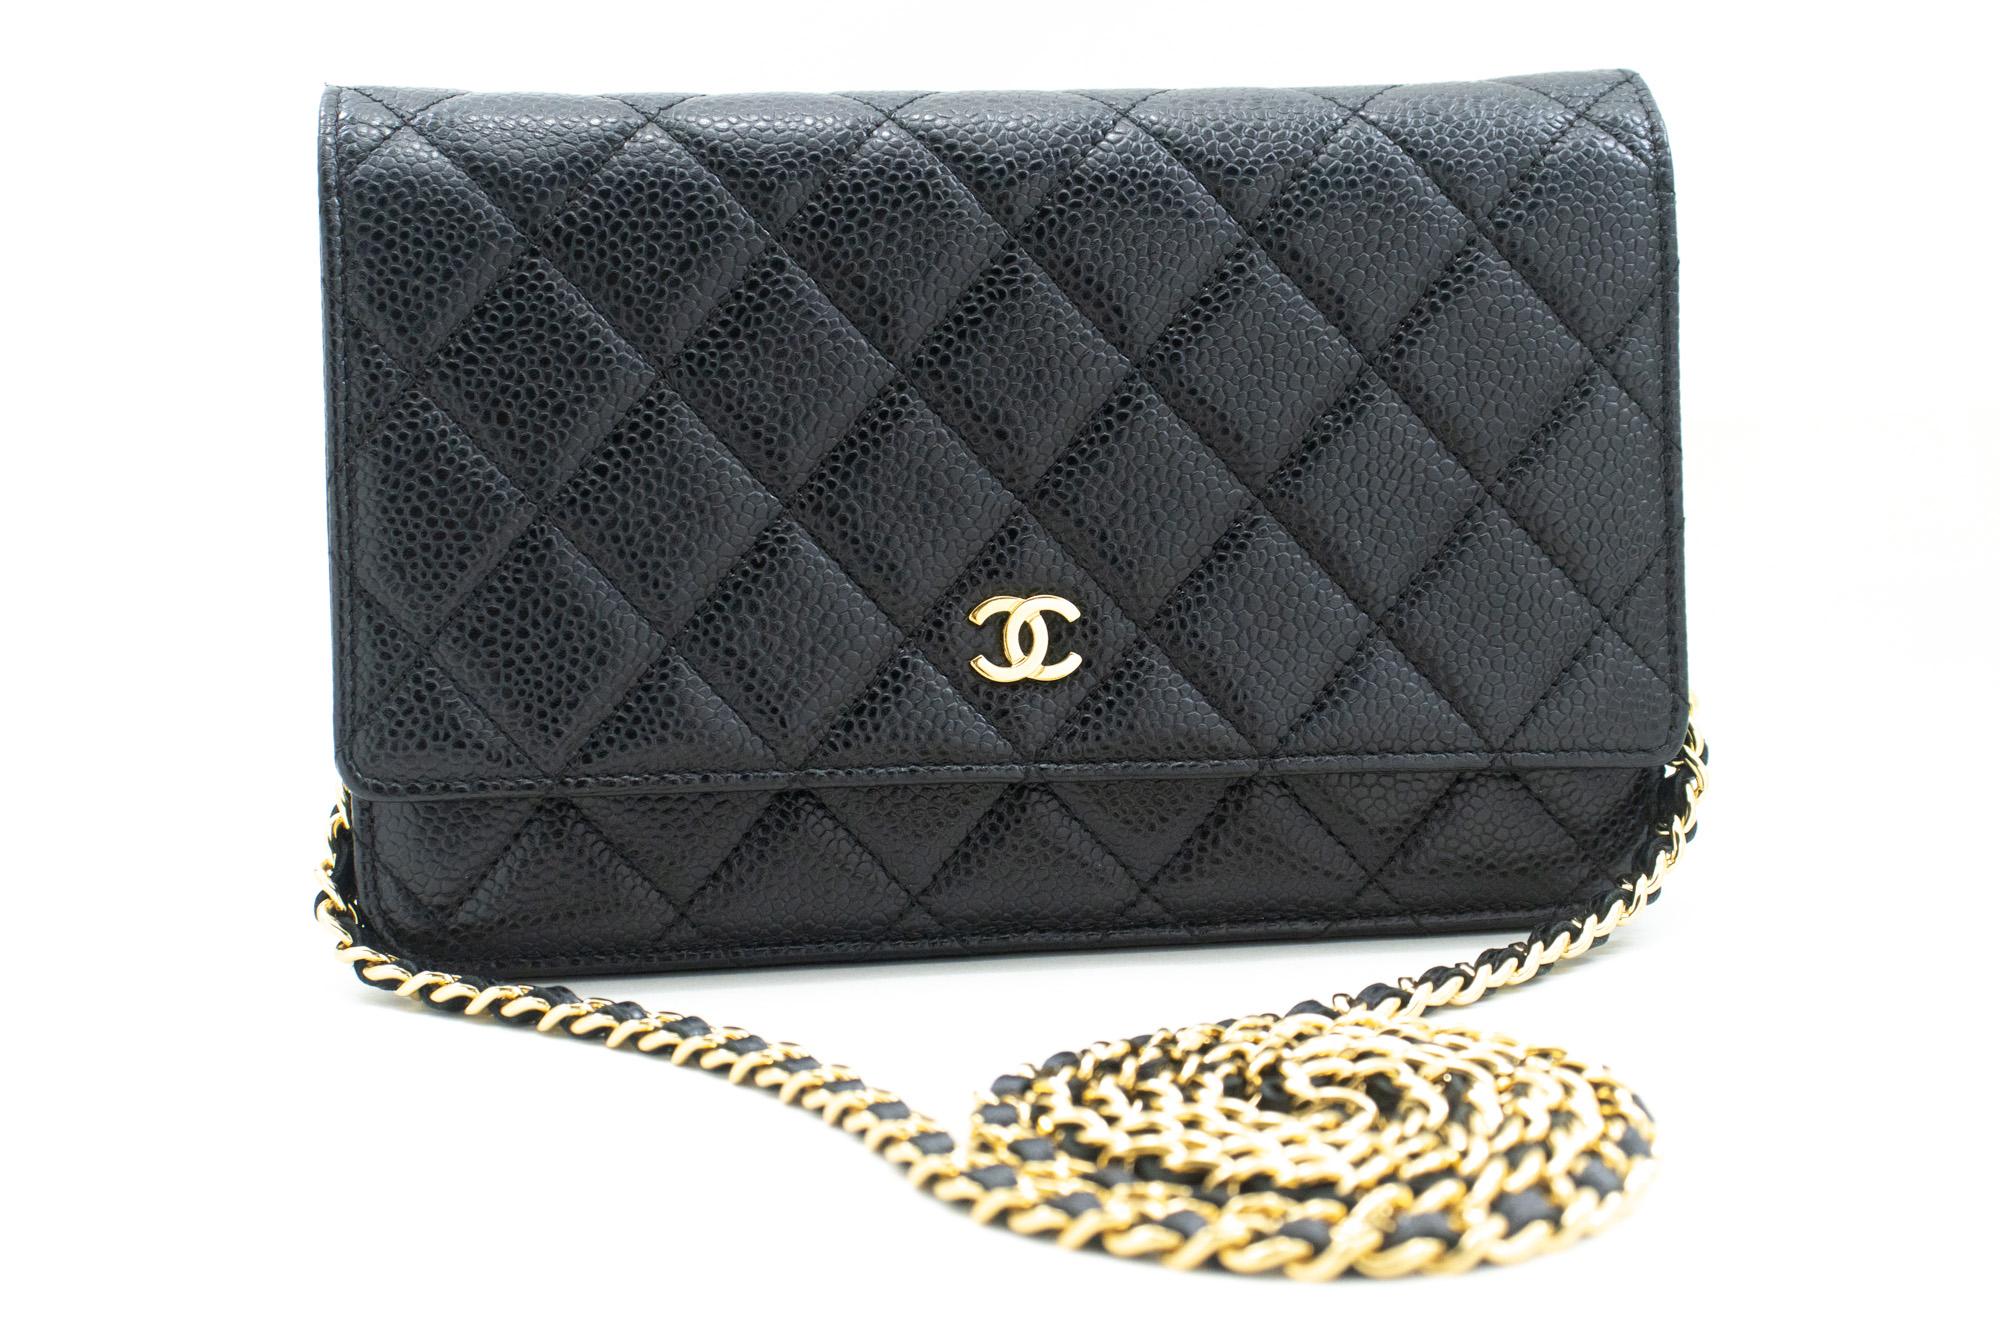 An authentic CHANEL Caviar Wallet On Chain WOC Black Shoulder Bag Crossbody. The color is Black. The outside material is Leather. The pattern is Solid. This item is Contemporary. The year of manufacture would be 2017.
Conditions & Ratings
Outside